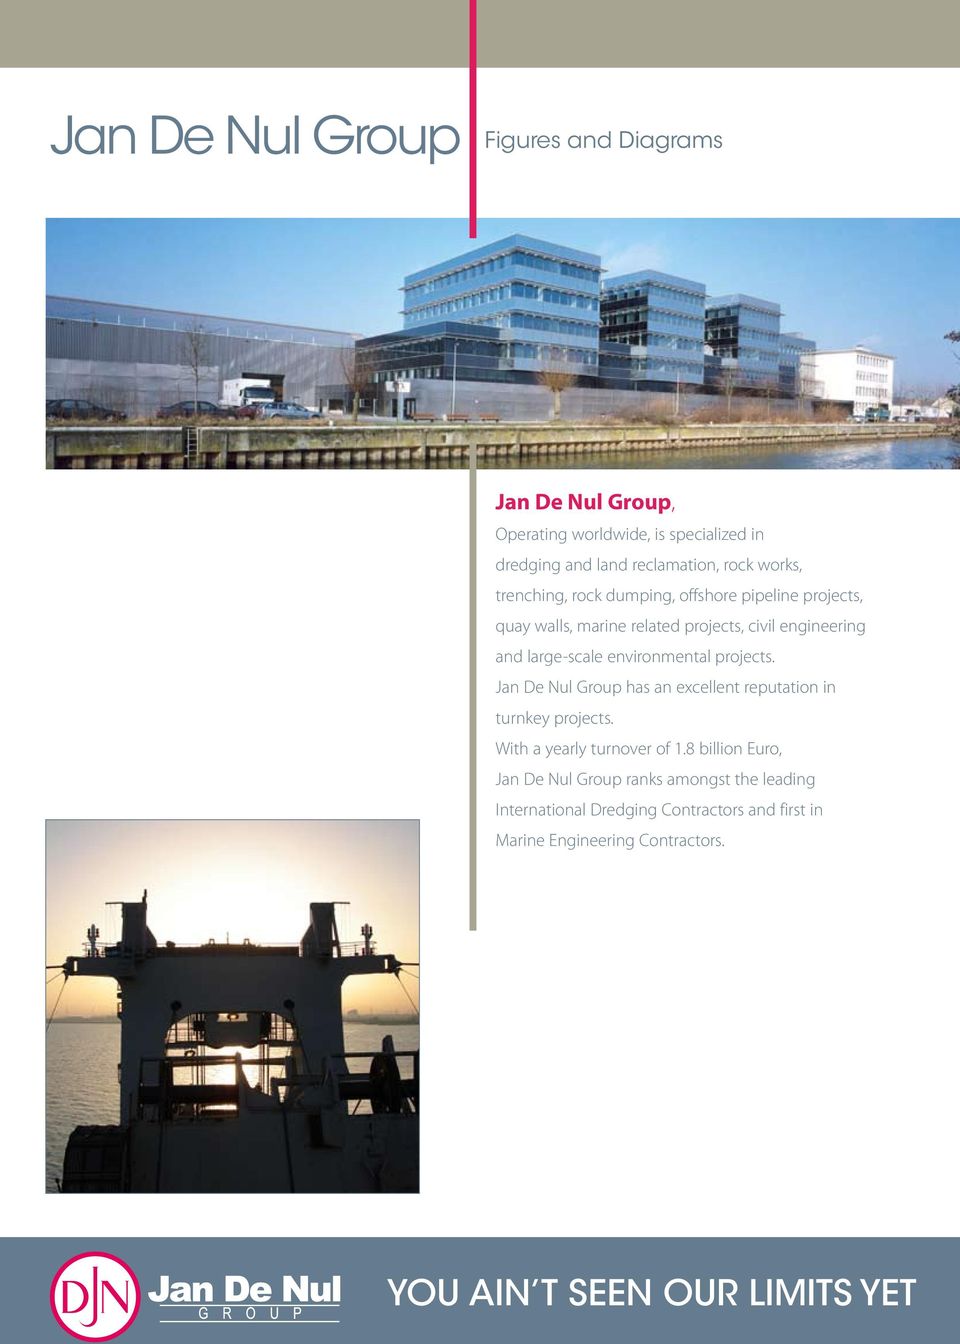 environmental projects. Jan De Nul Group has an excellent reputation in turnkey projects. With a yearly turnover of 1.